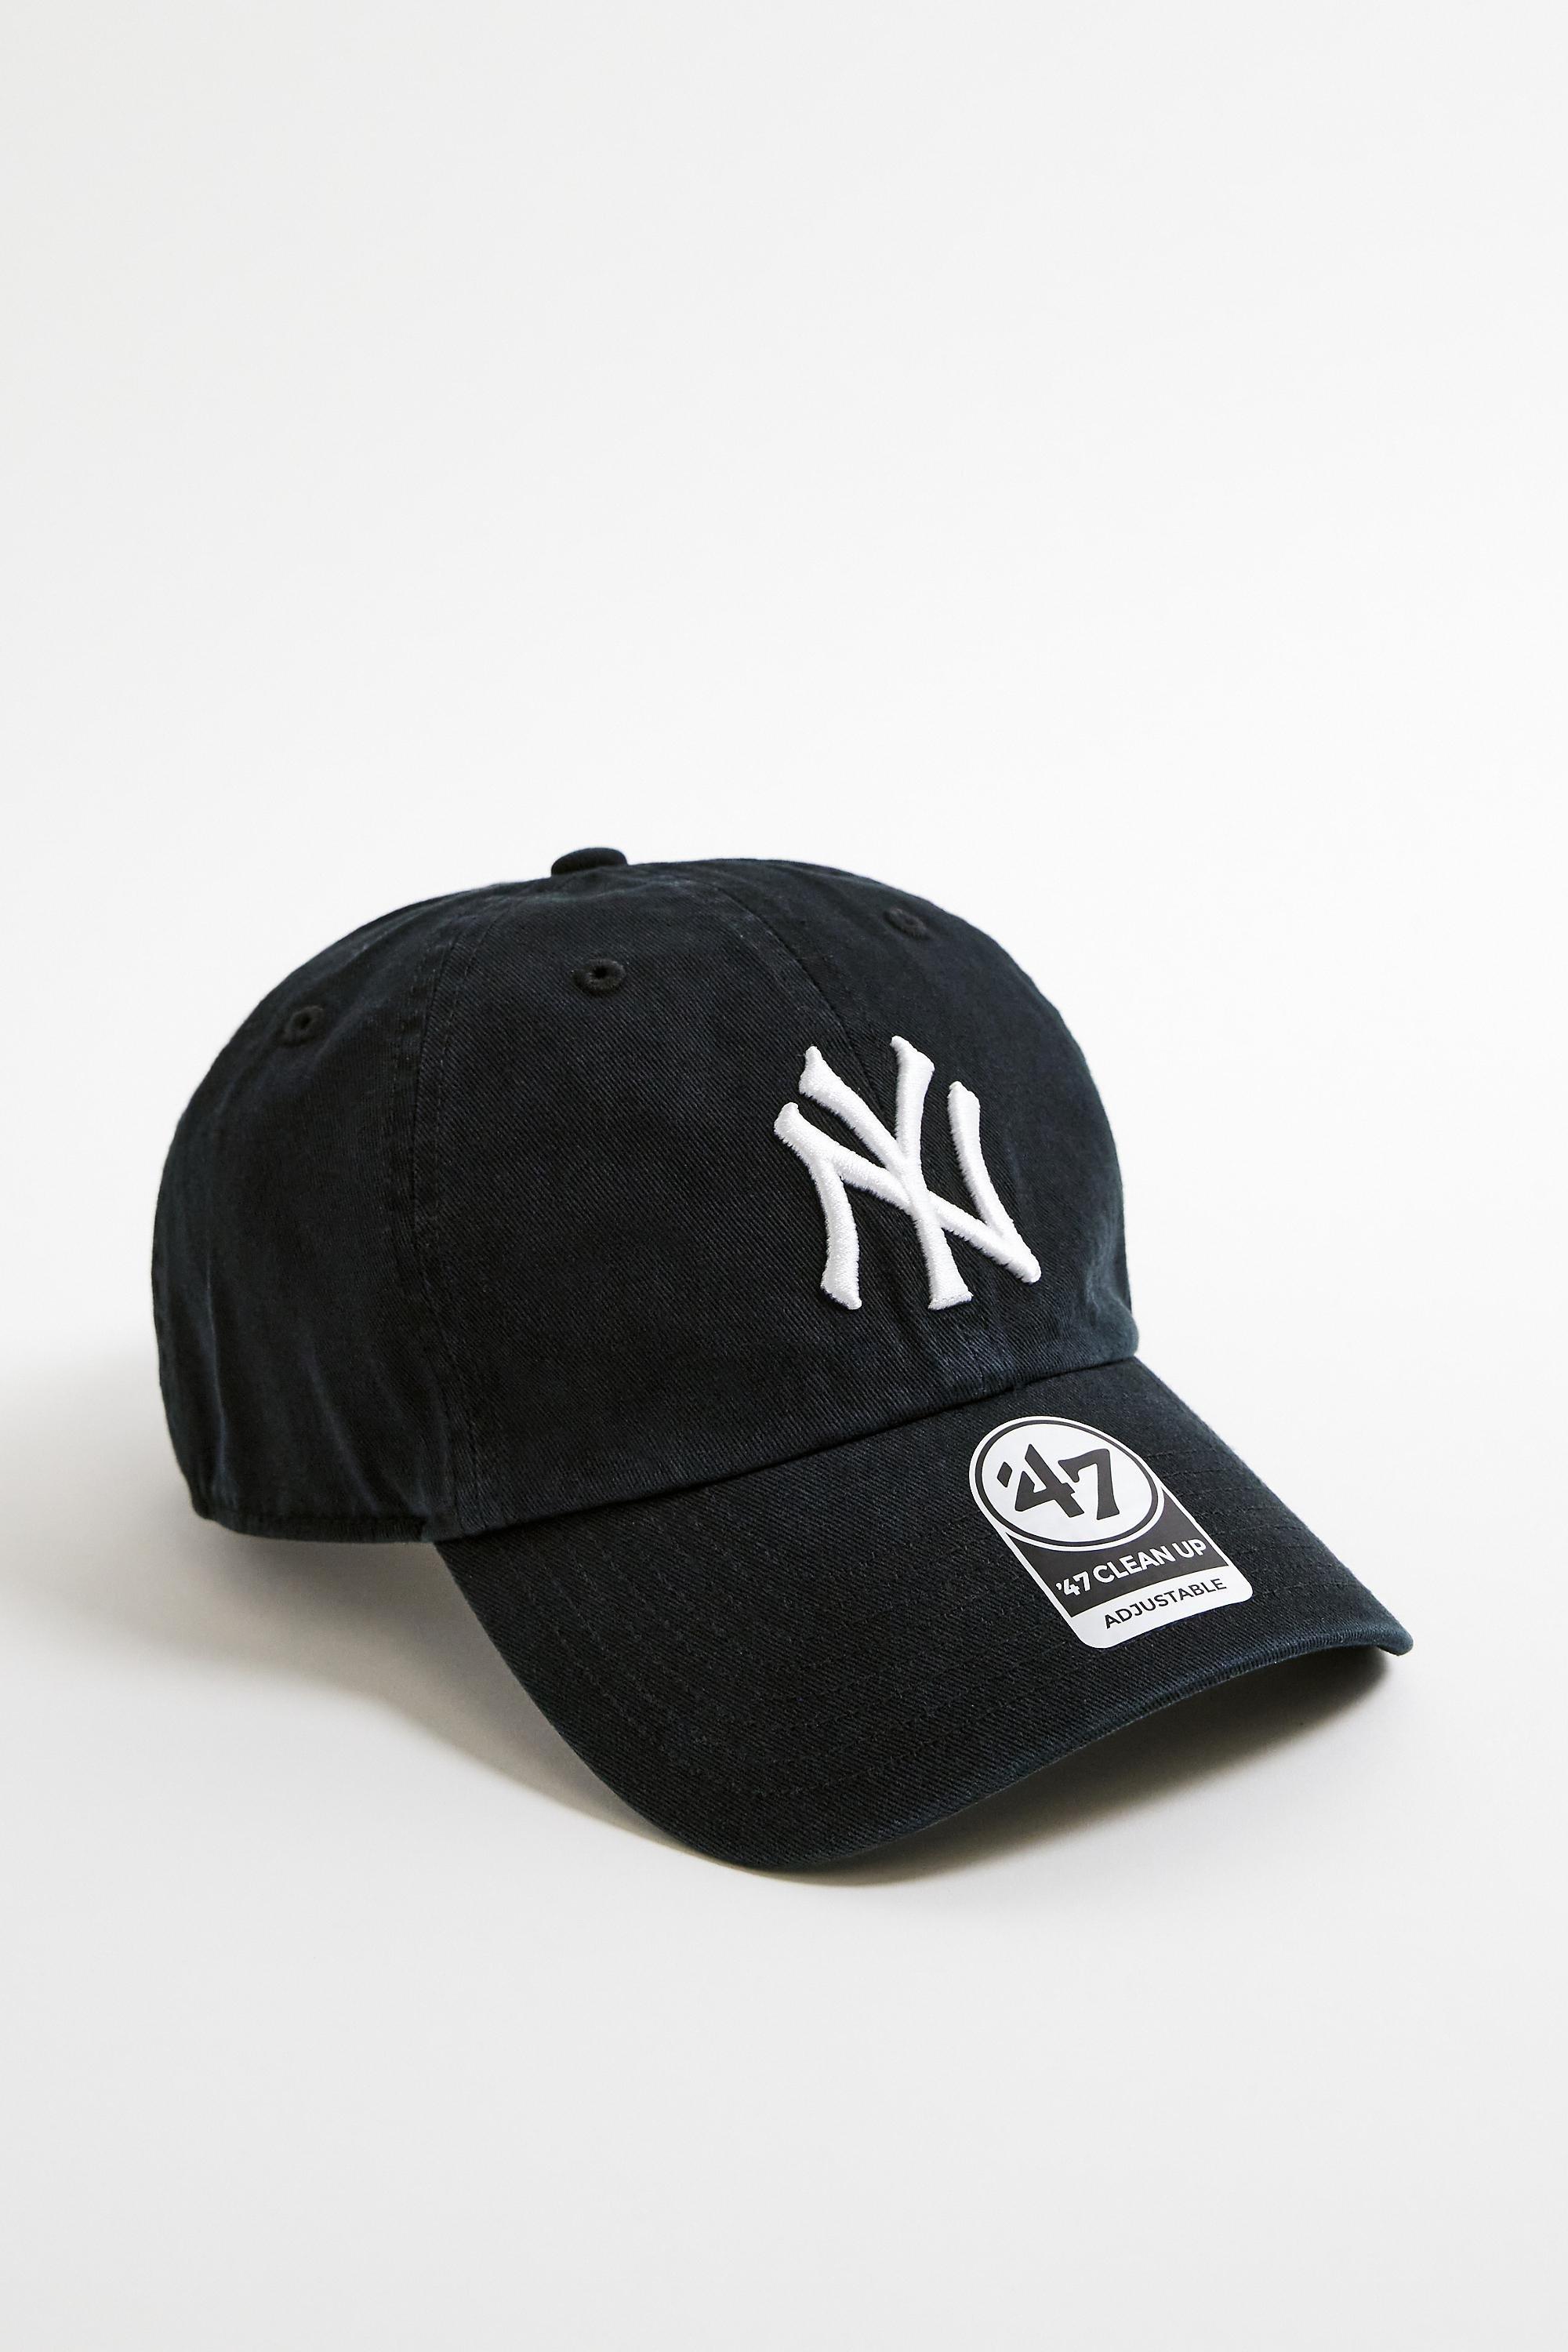 Urban Outfitters - Black 47 Ny Cap